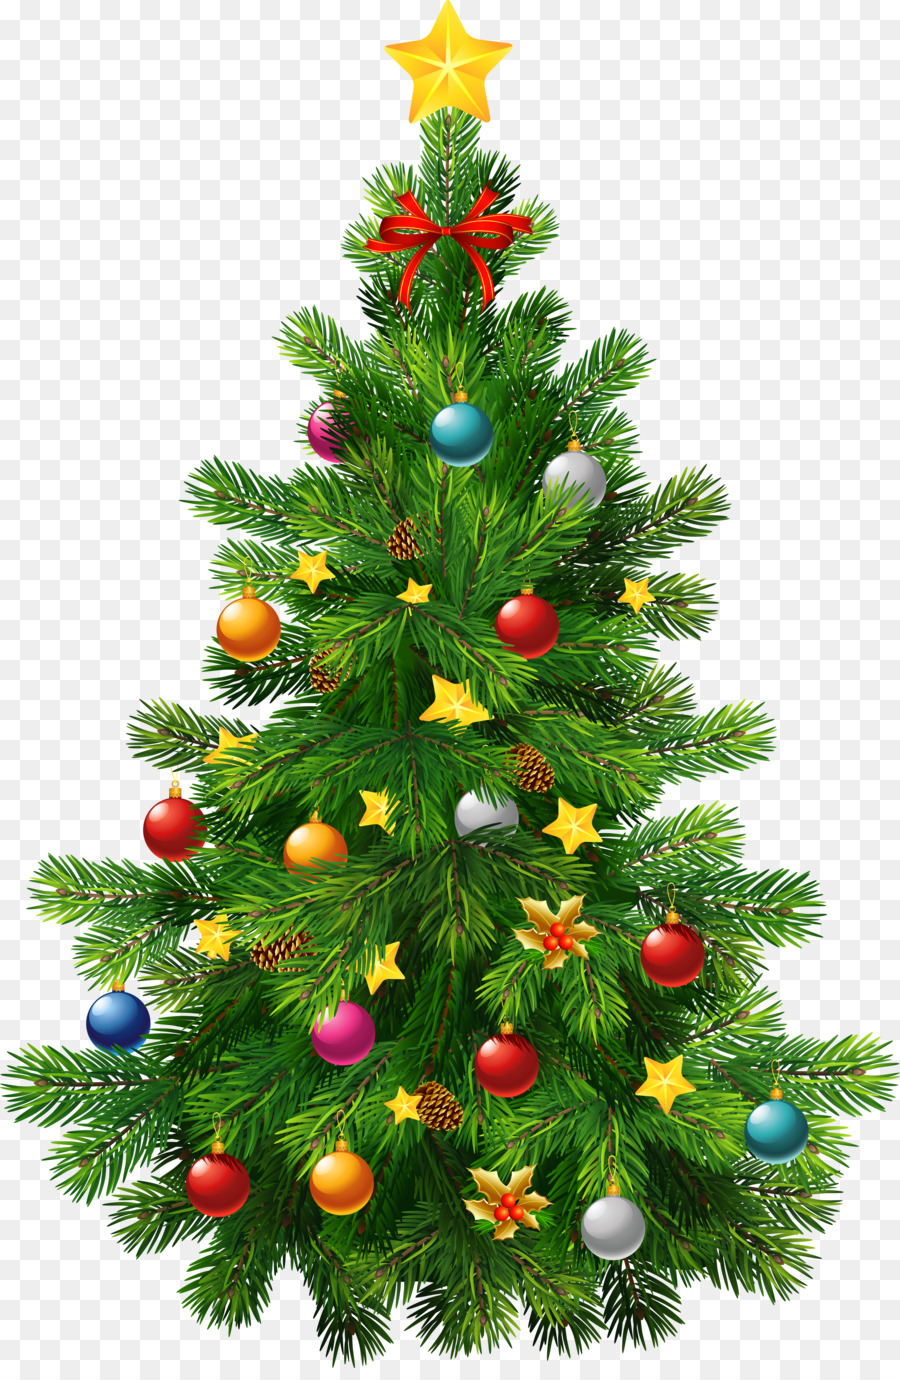 Christmas tree Clip art - Transparent Christmas Cliparts png download ...